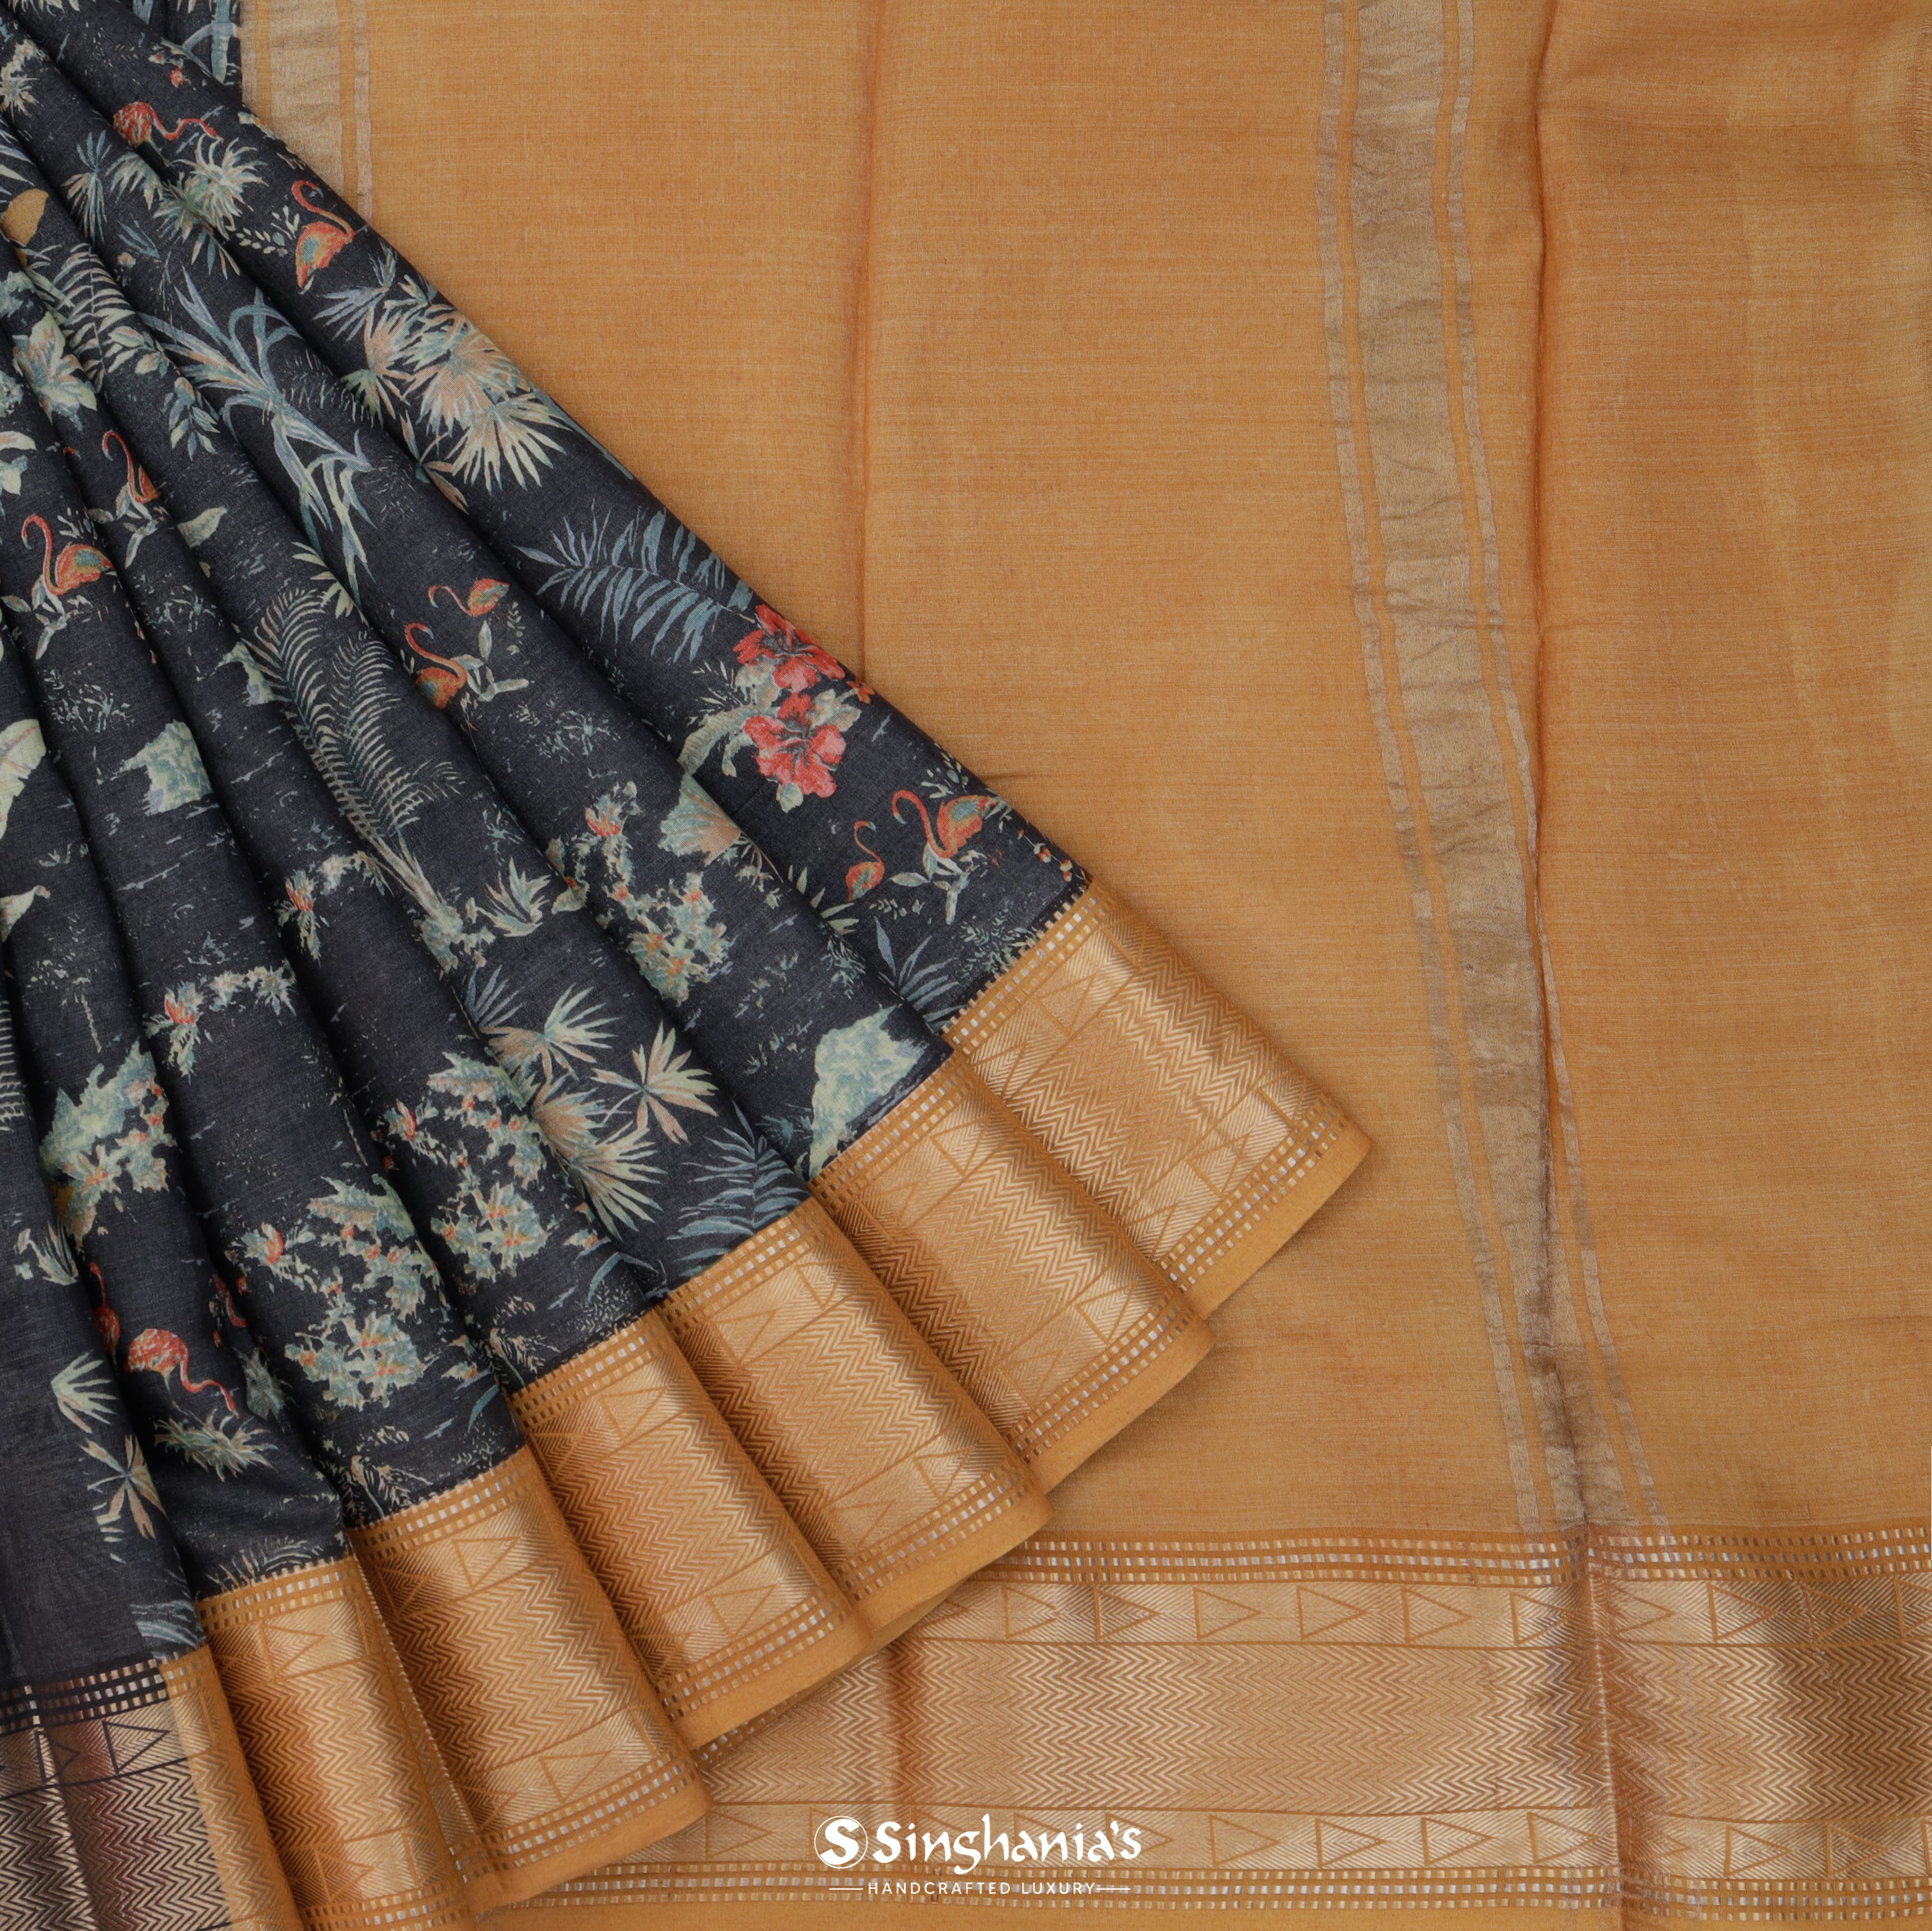 Black Grain Cotton Printed Saree With Nature Inspired Motif Pattern